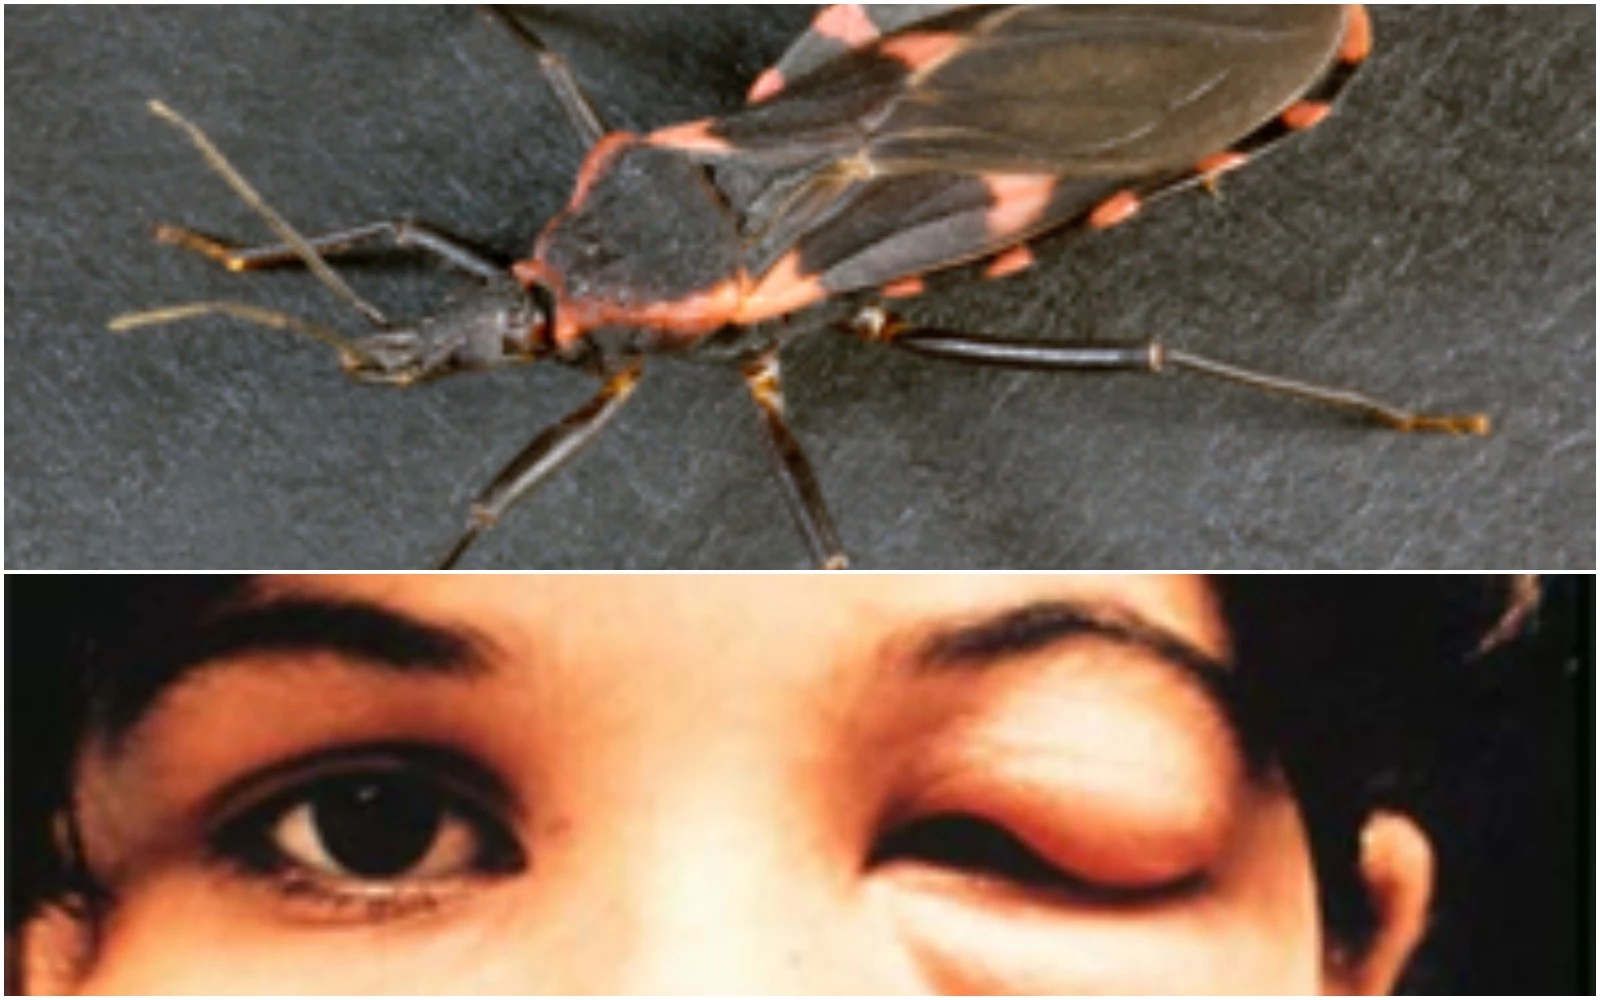 Kissing Bug - New Treatment Brings Hope To Those Bitten By The Kissing Bug - Here's a look at